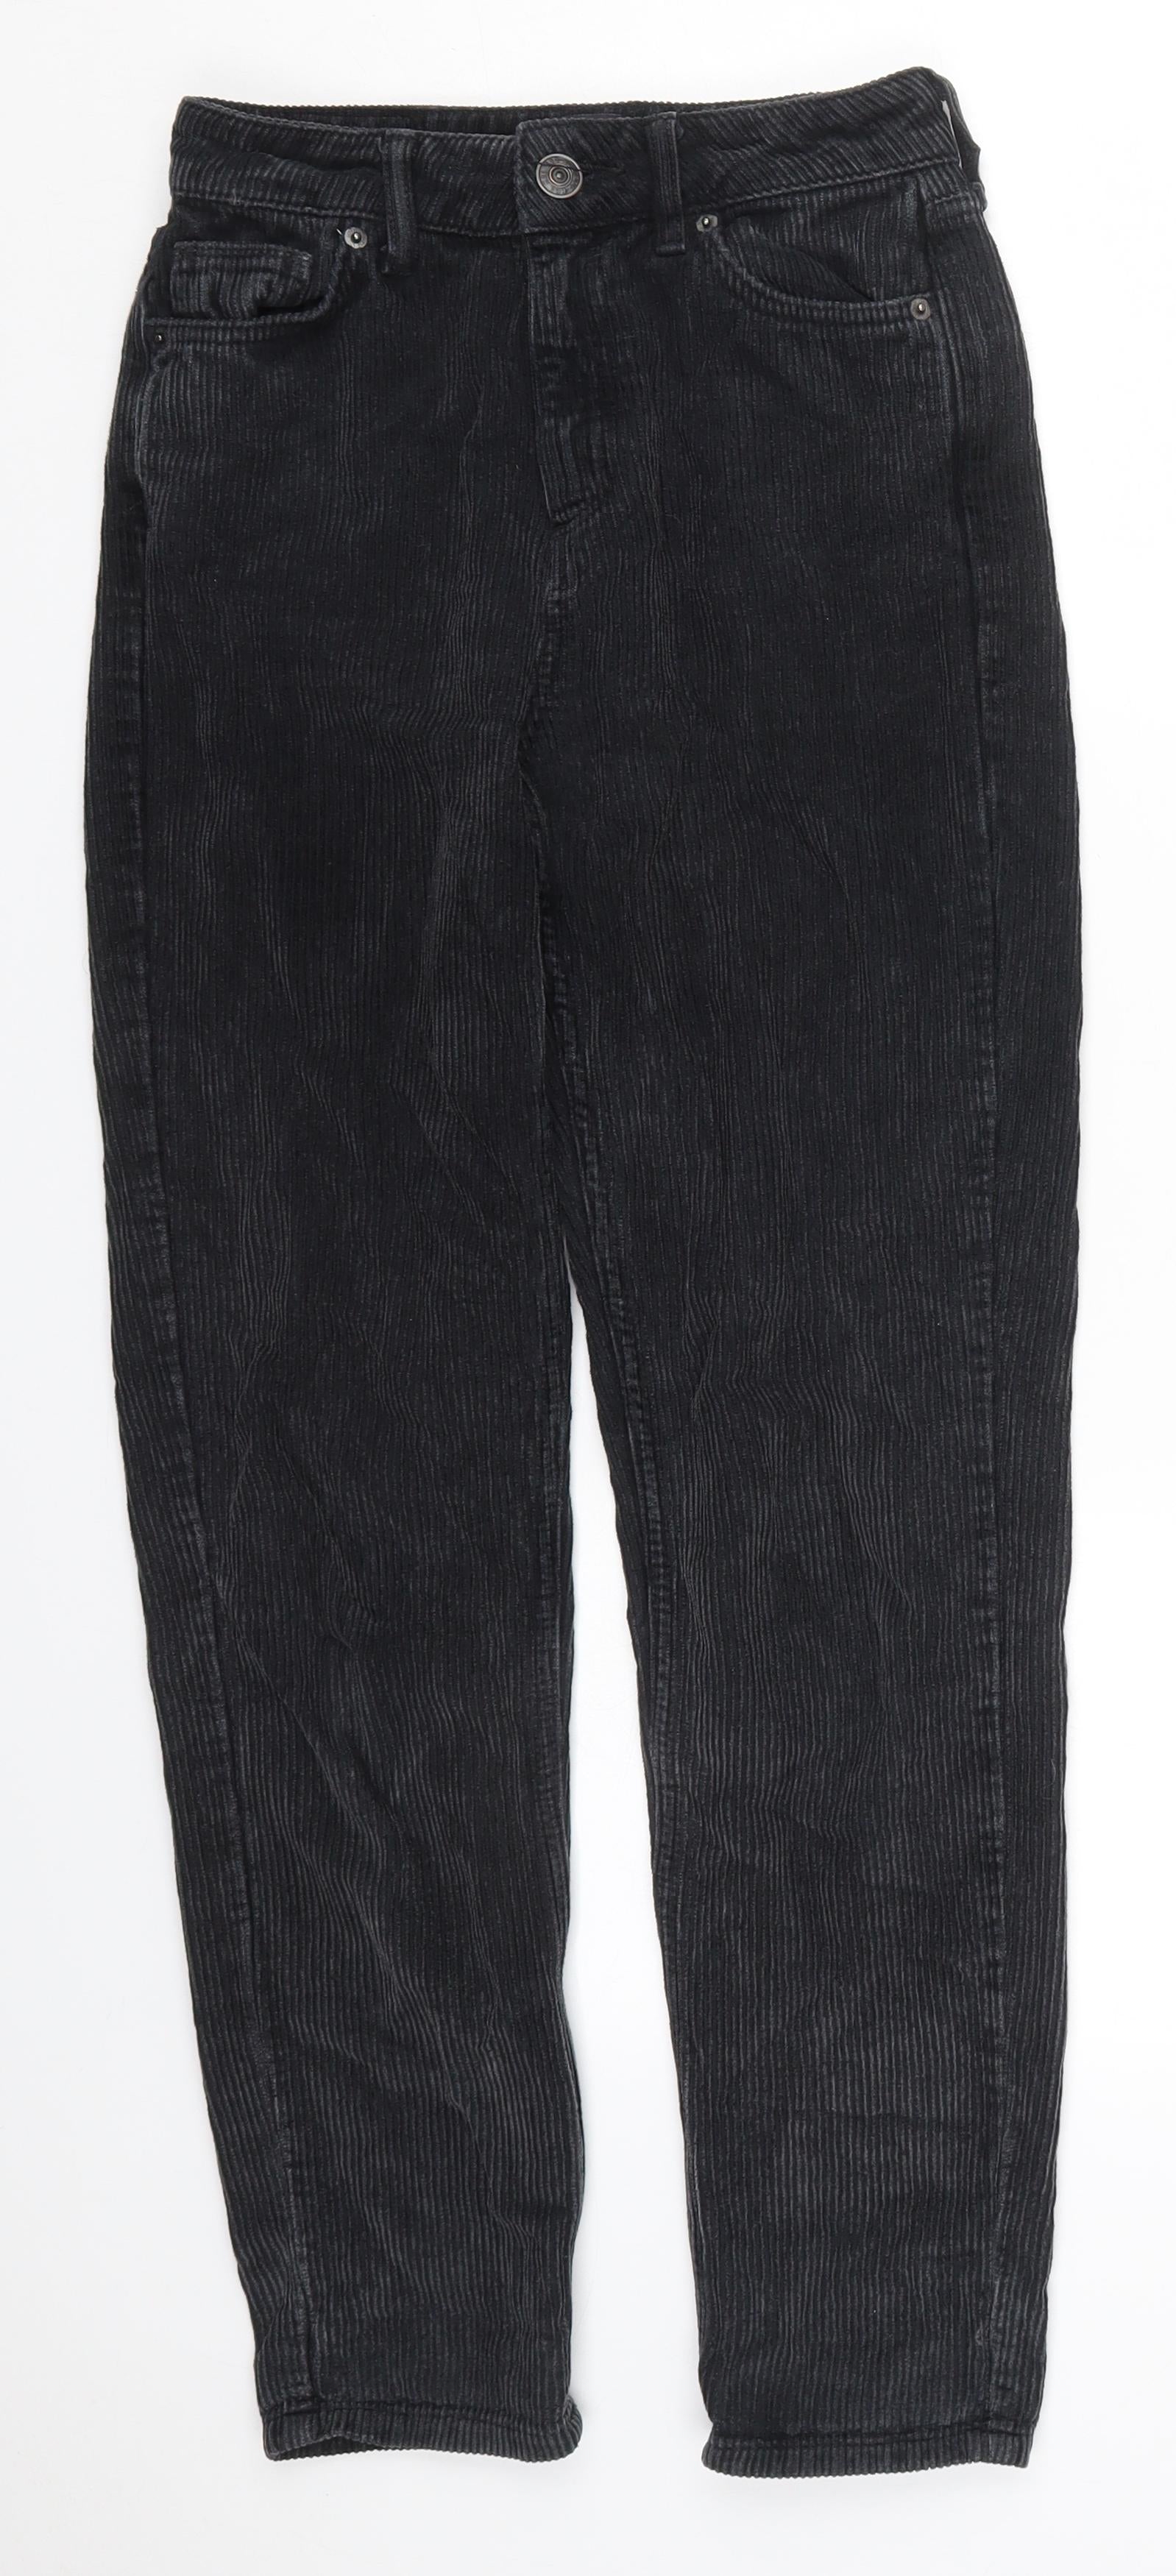 BDG Maya Baggy Trouser Pant | Urban Outfitters Japan - Clothing, Music,  Home & Accessories